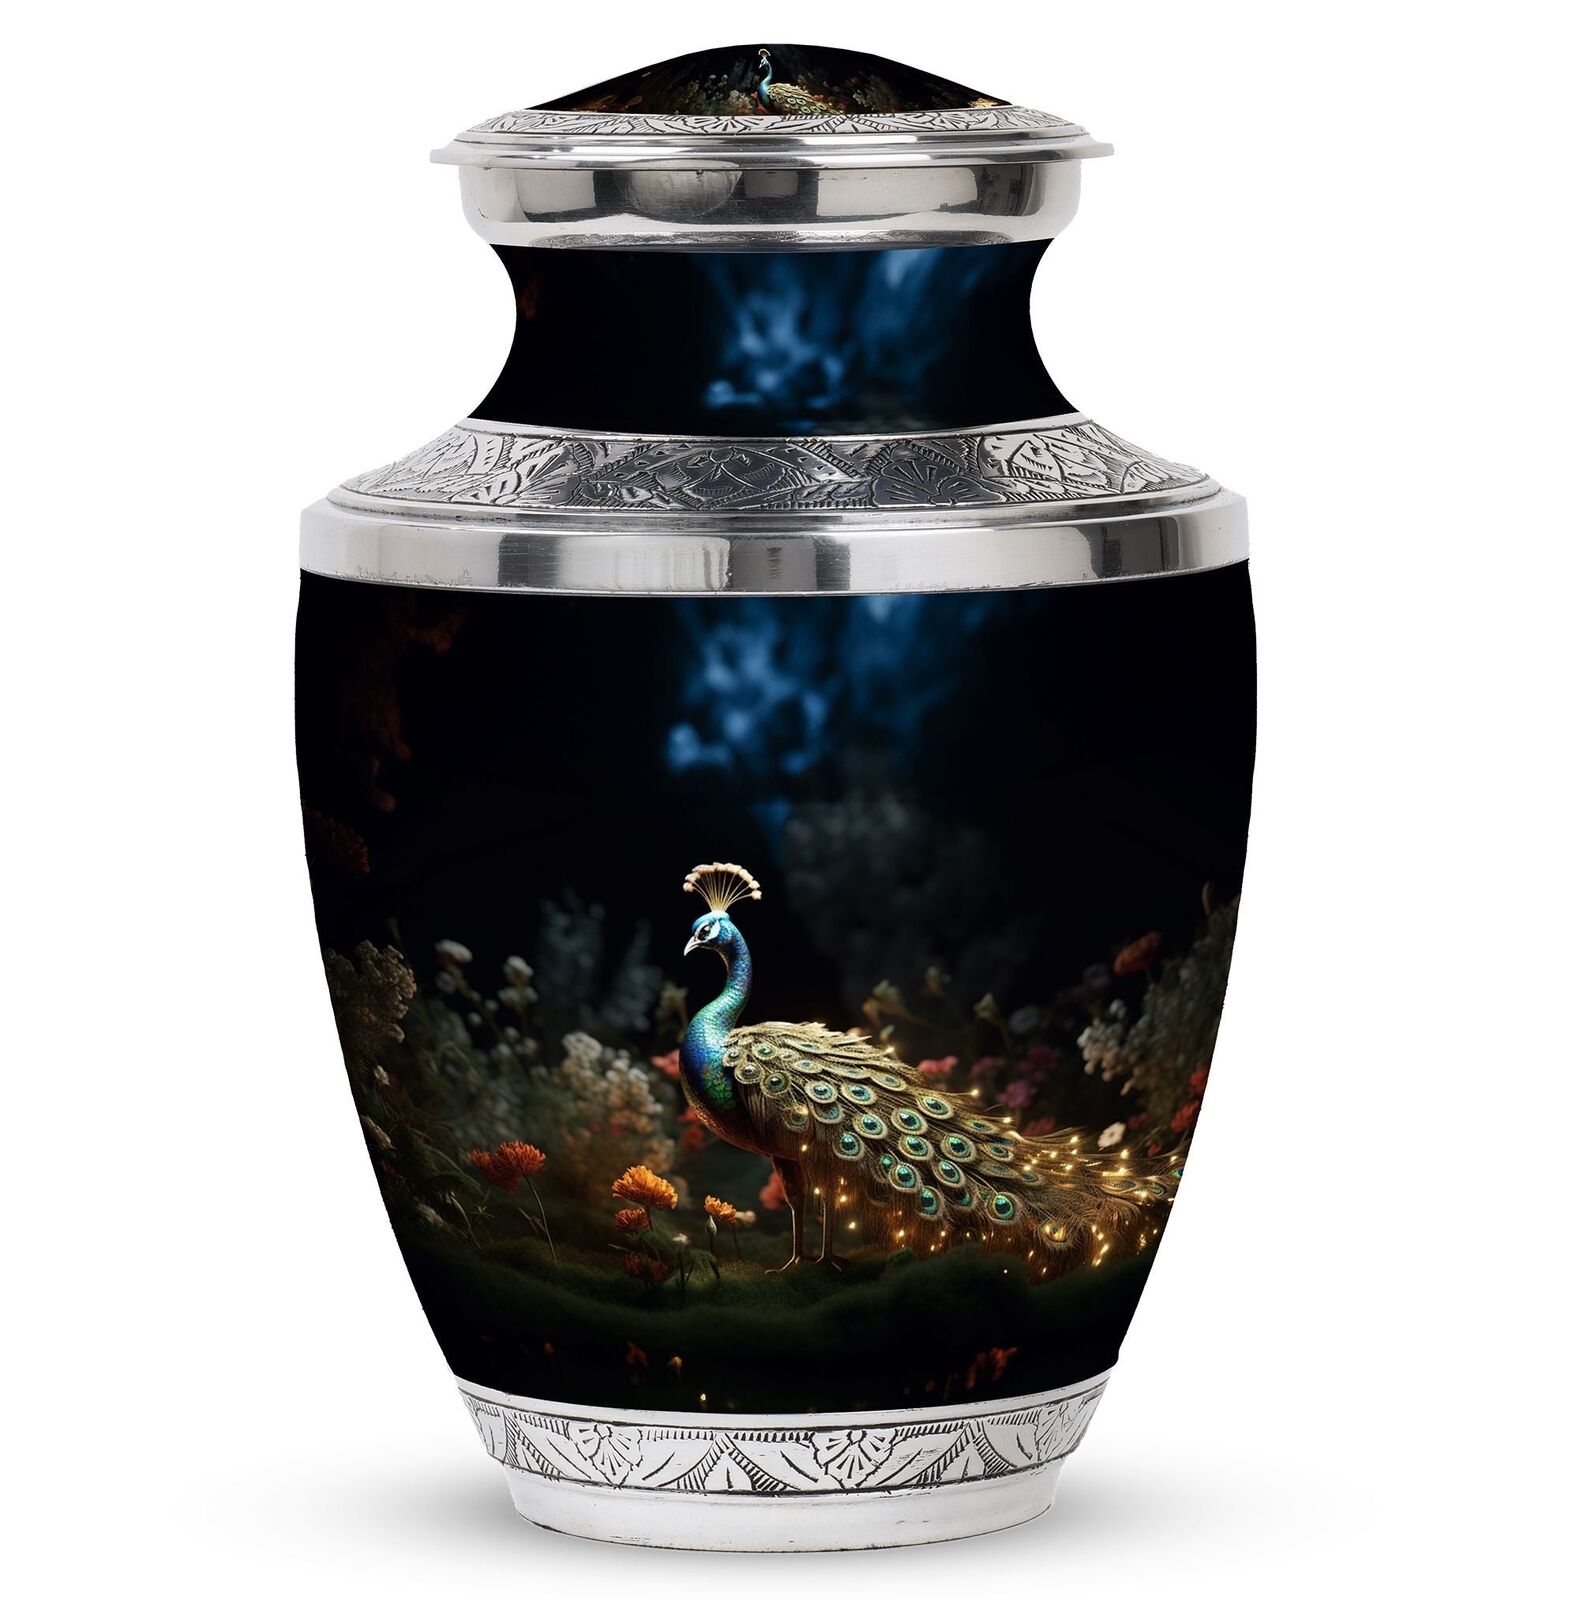 Elegant Peacock Cremation Urn for Ashes - Beautiful Peacock Urn